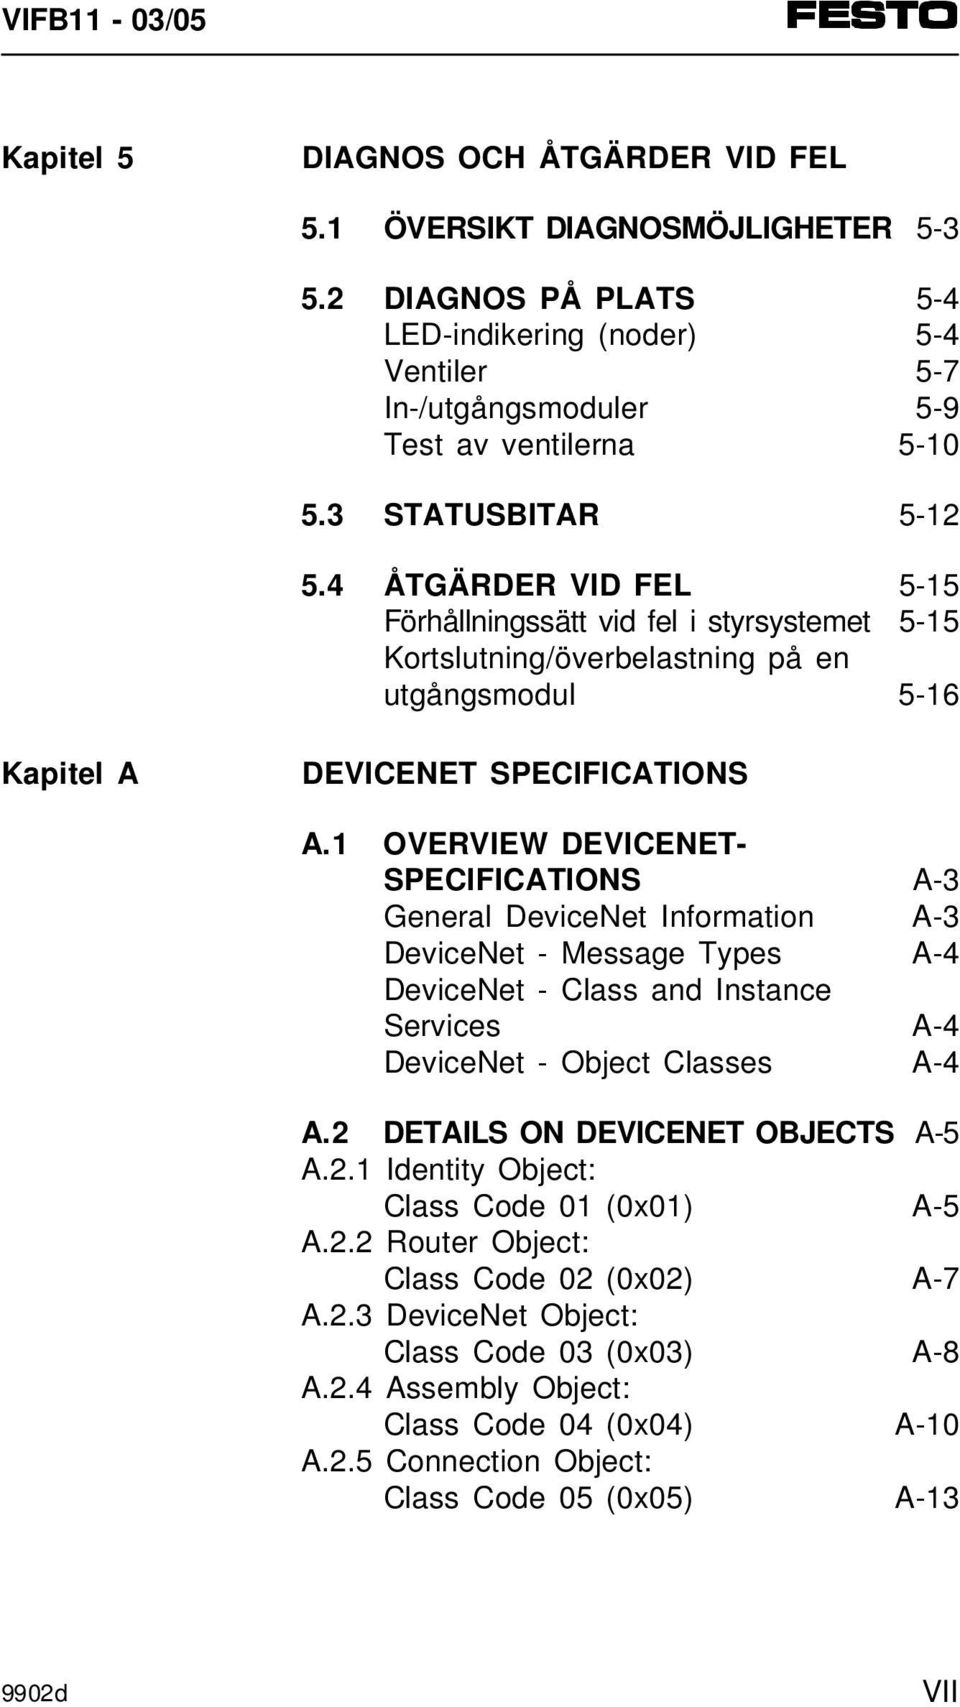 1 OVERVIEW DEVICENET- SPECIFICATIONS A-3 General DeviceNet Information A-3 DeviceNet - Message Types A-4 DeviceNet - Class and Instance Services A-4 DeviceNet - Object Classes A-4 A.